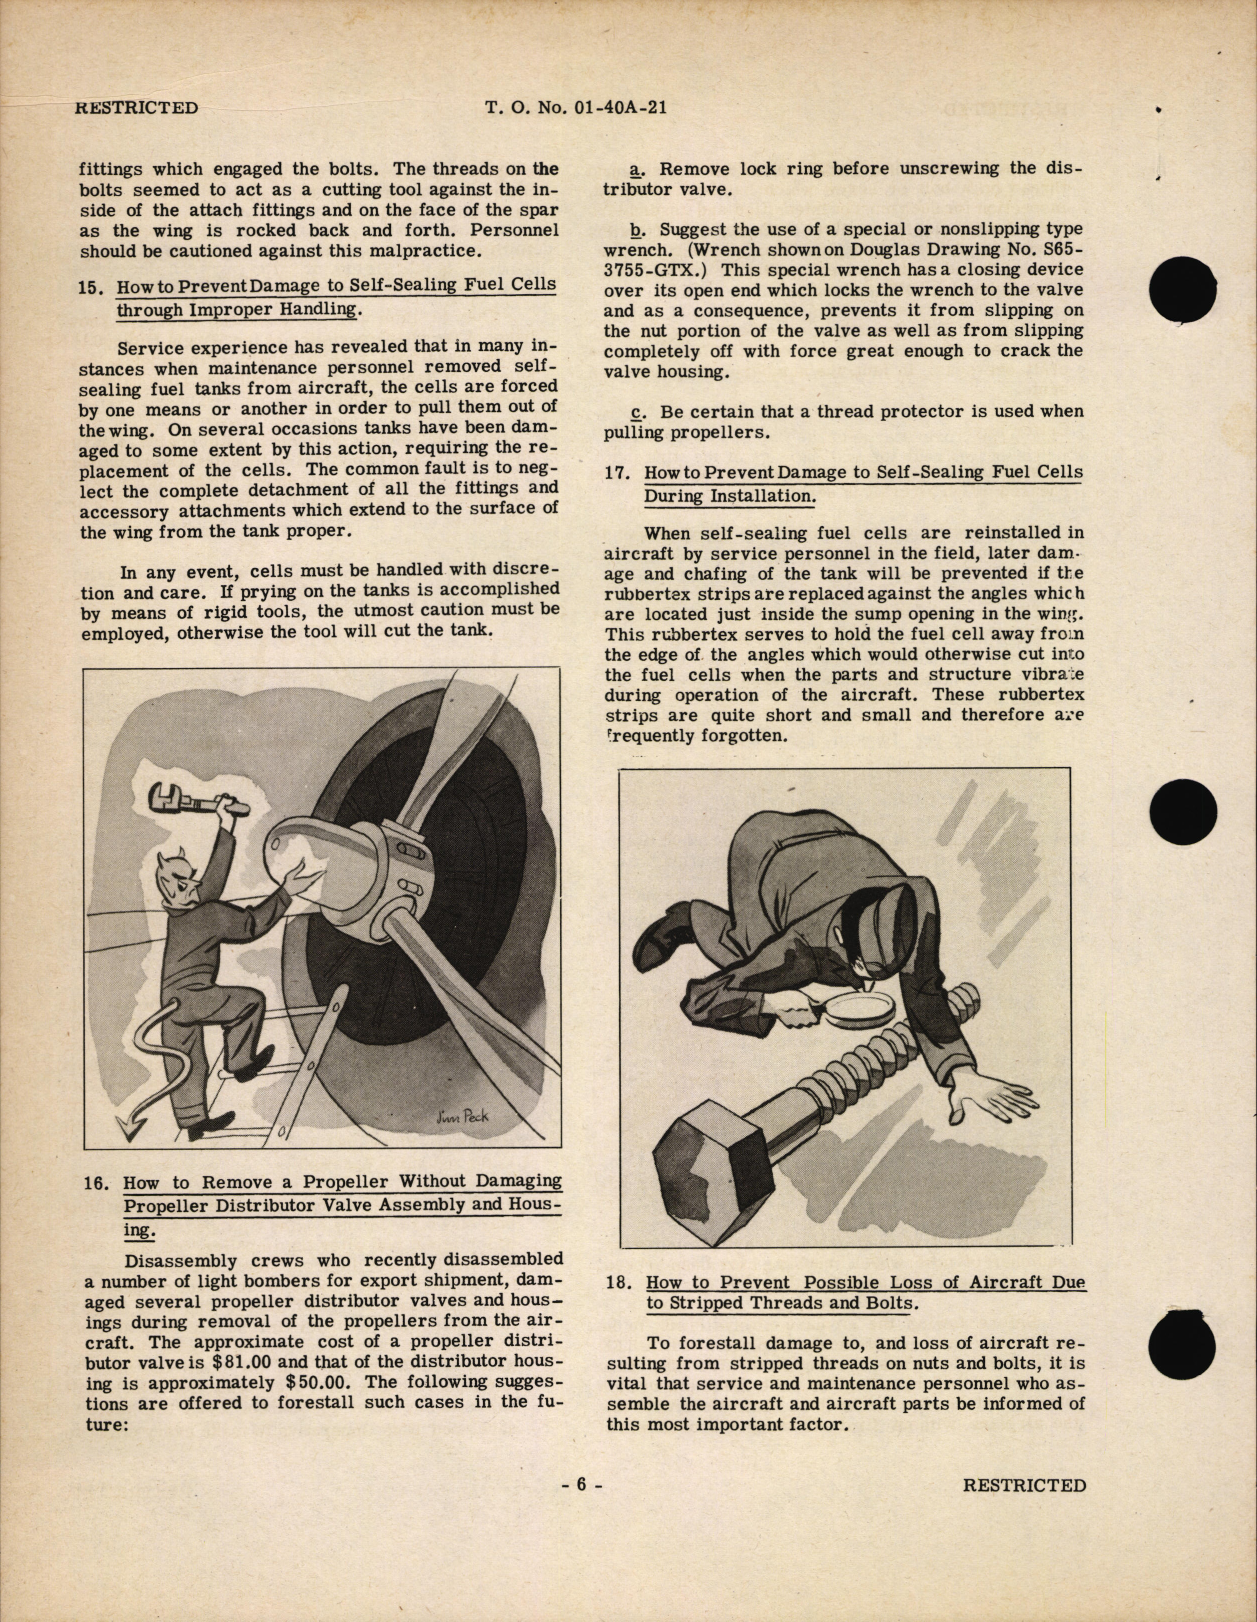 Sample page 8 from AirCorps Library document: Service Hints for Light Bombers